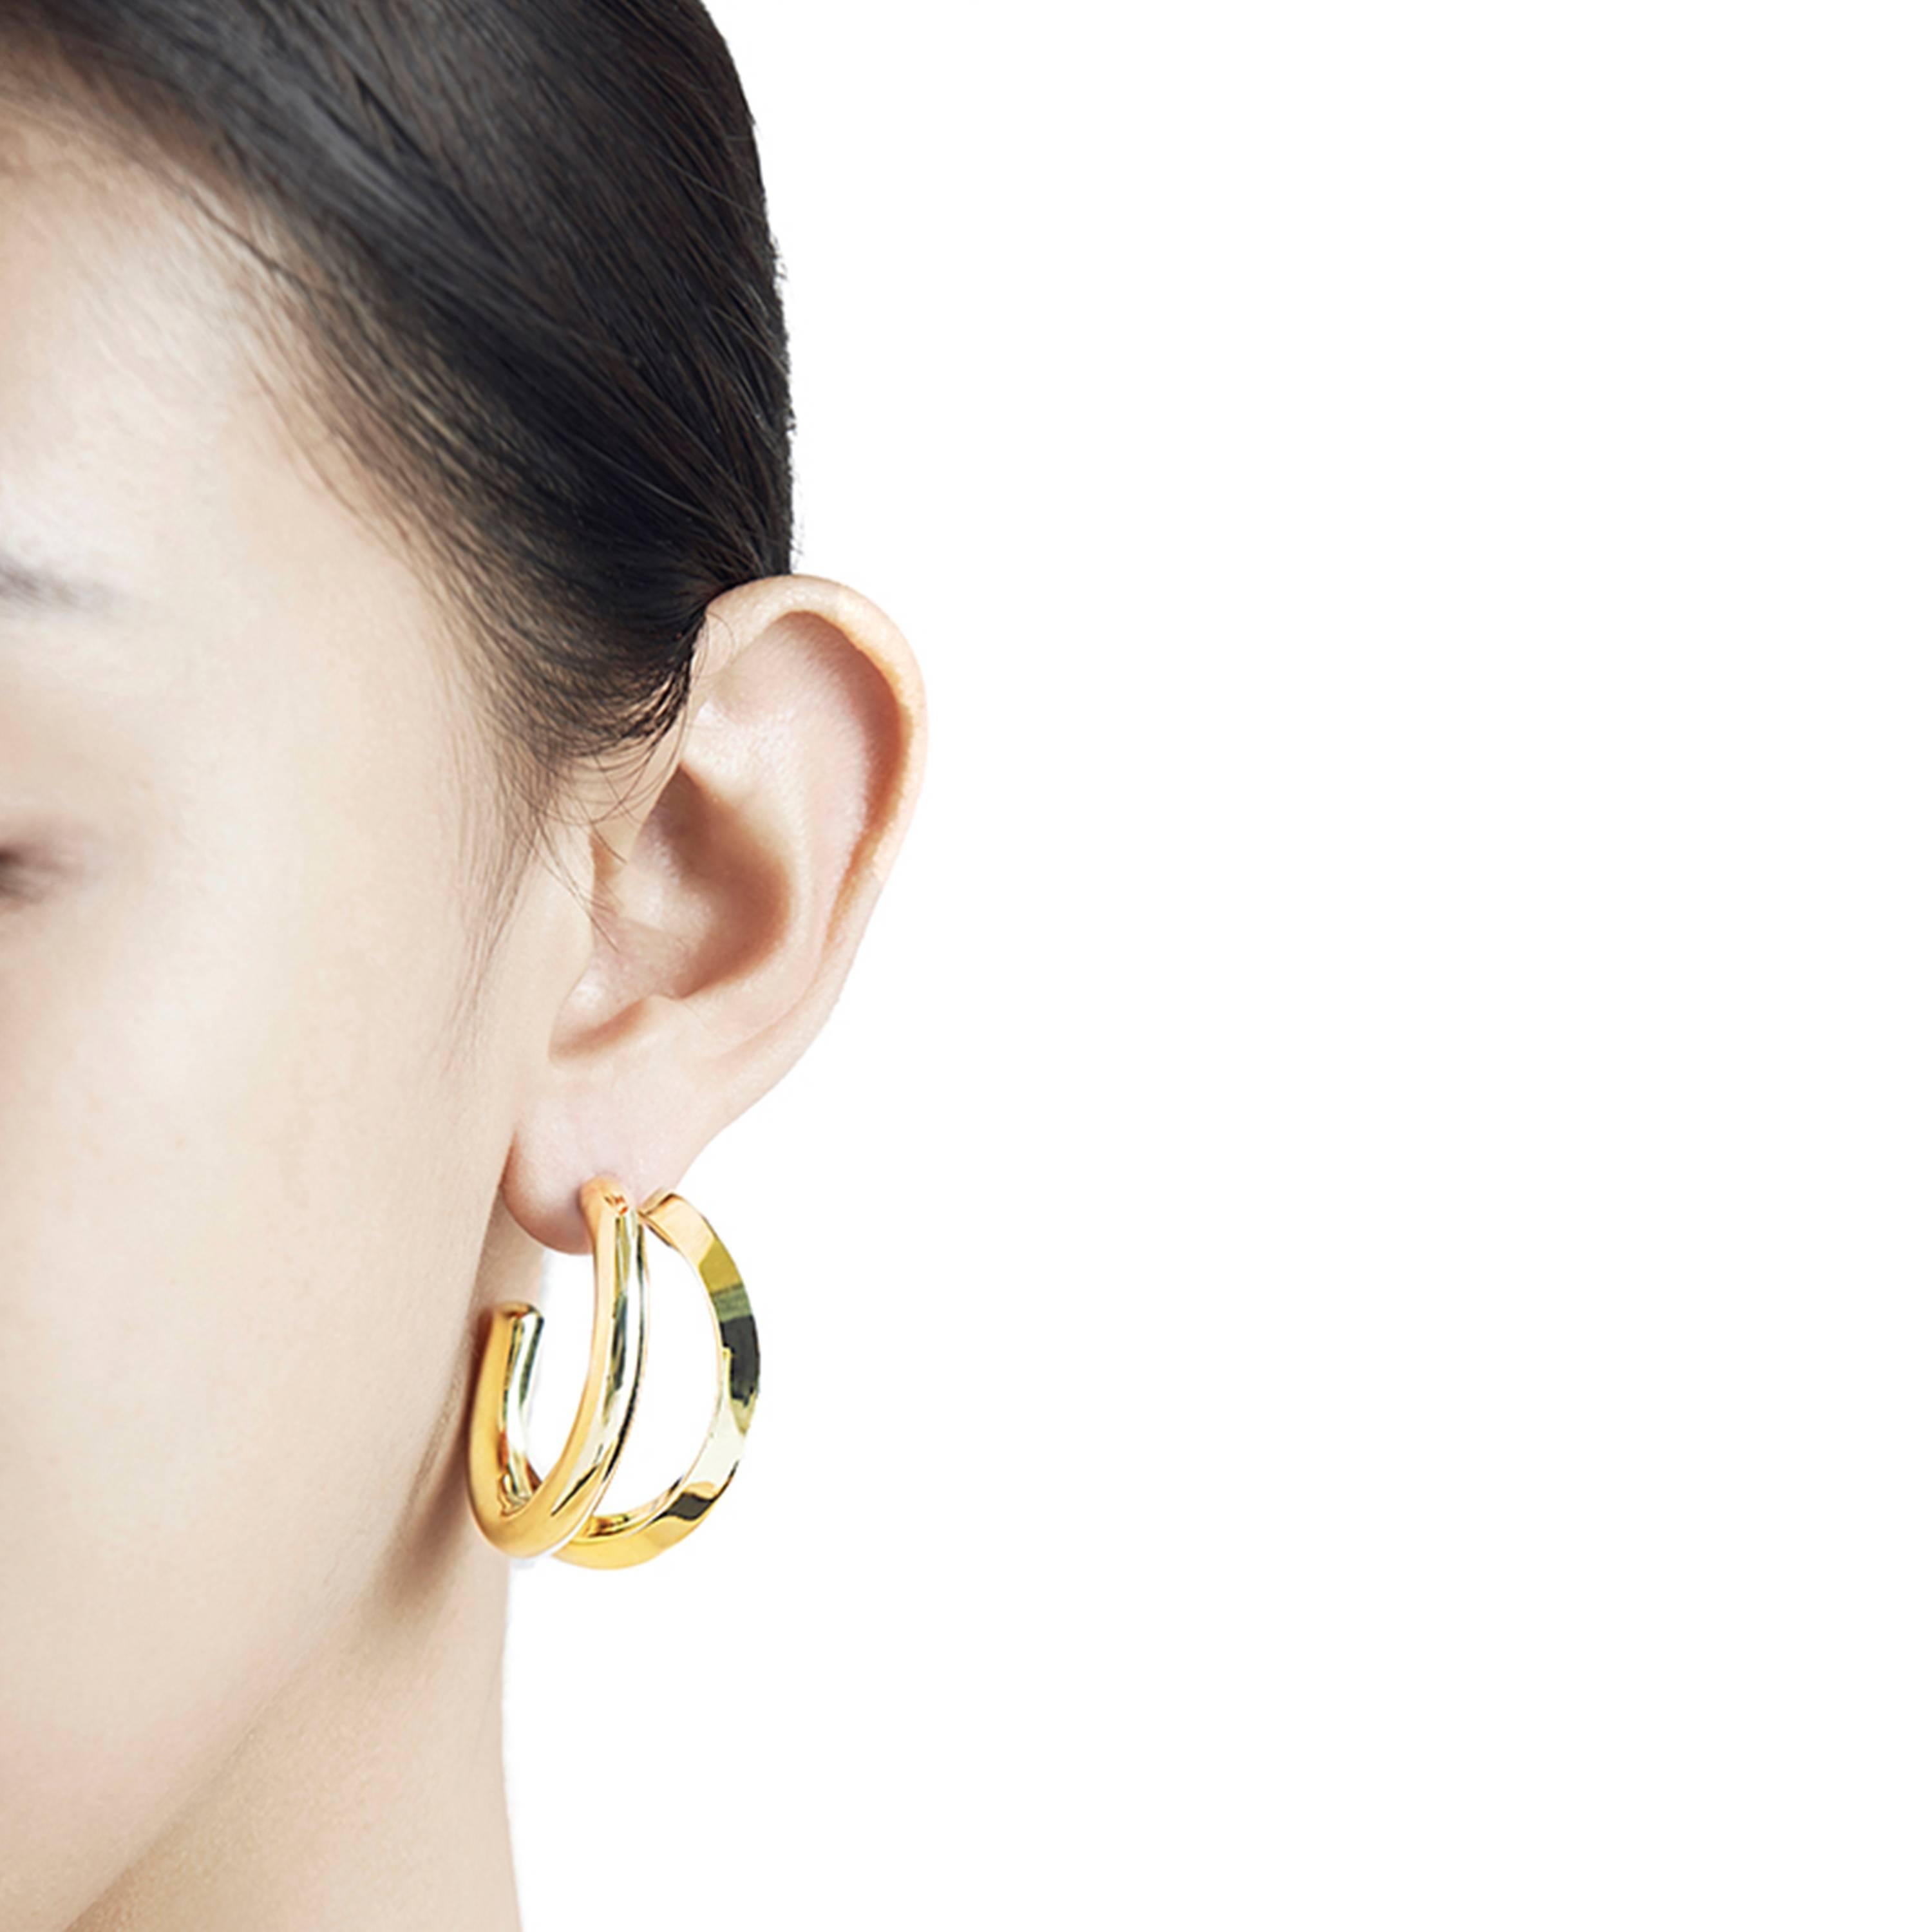 The 'Fusion Earrings, by Mistova, are from the NOVA 01 collection which explores the transition from square to round. They are easy to wear alternative to the regular hoops. Made from 18K gold.